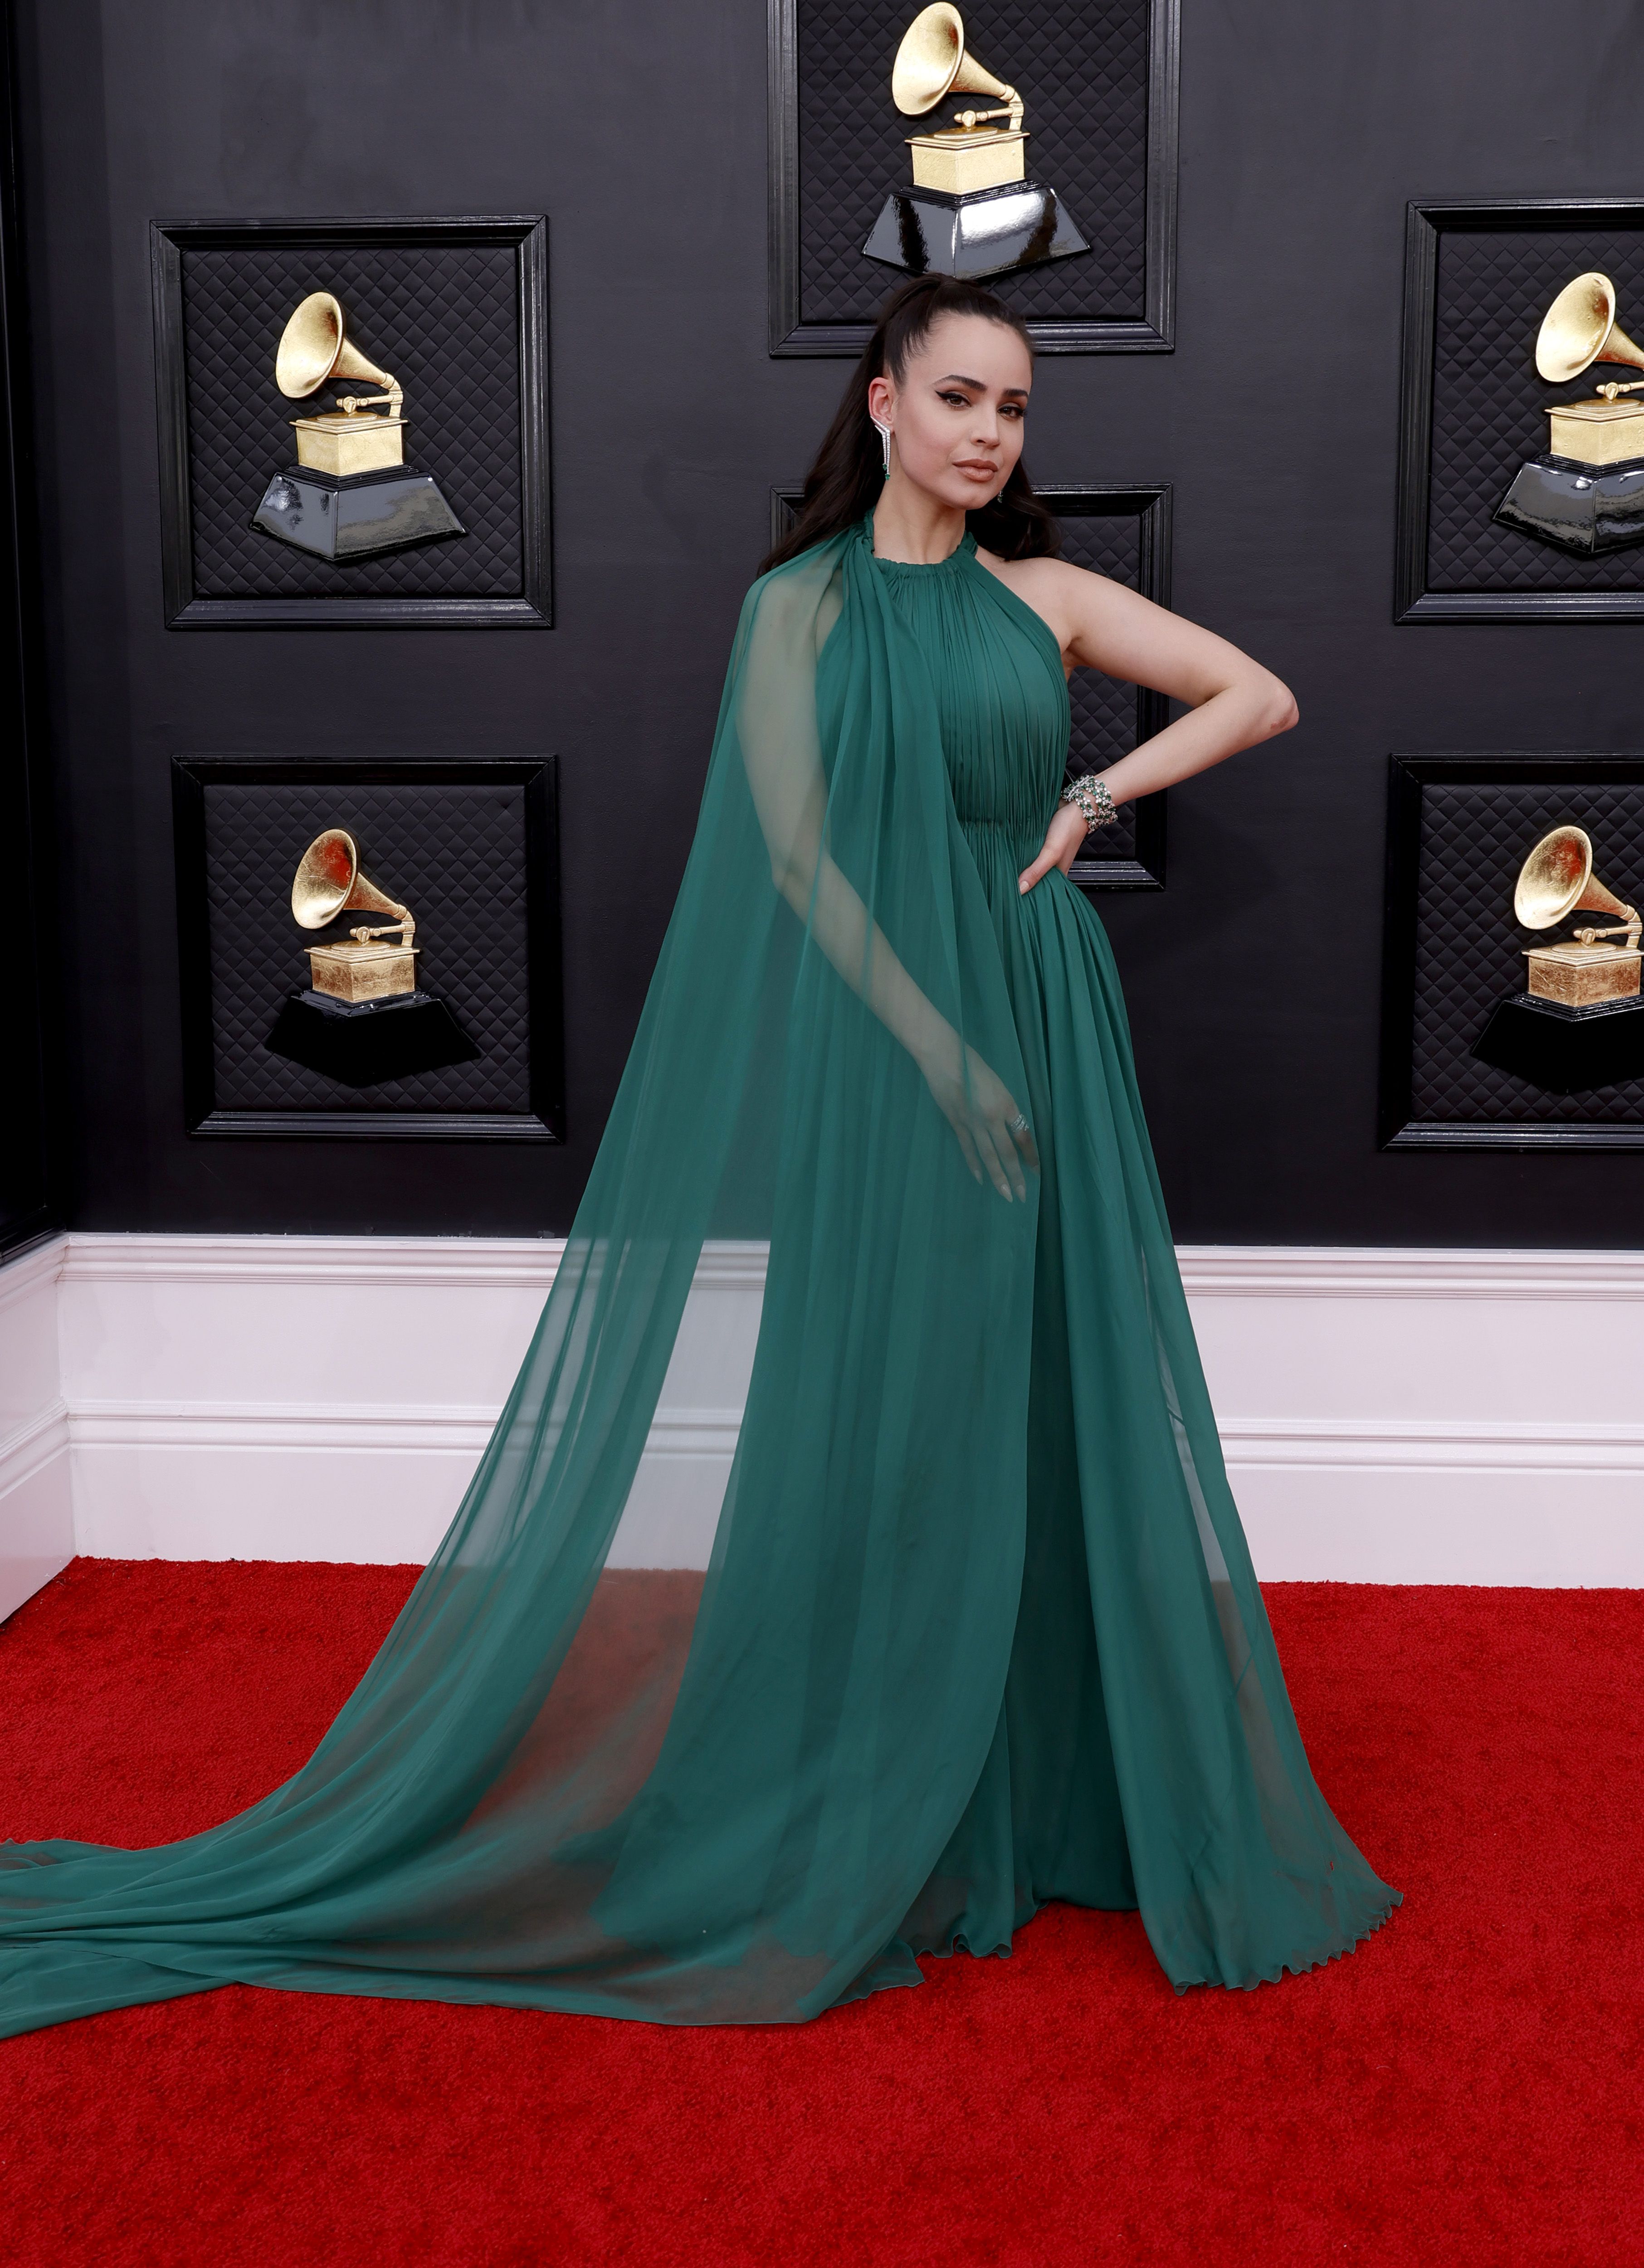 See All the Red Carpet Looks from the 2022 Grammys